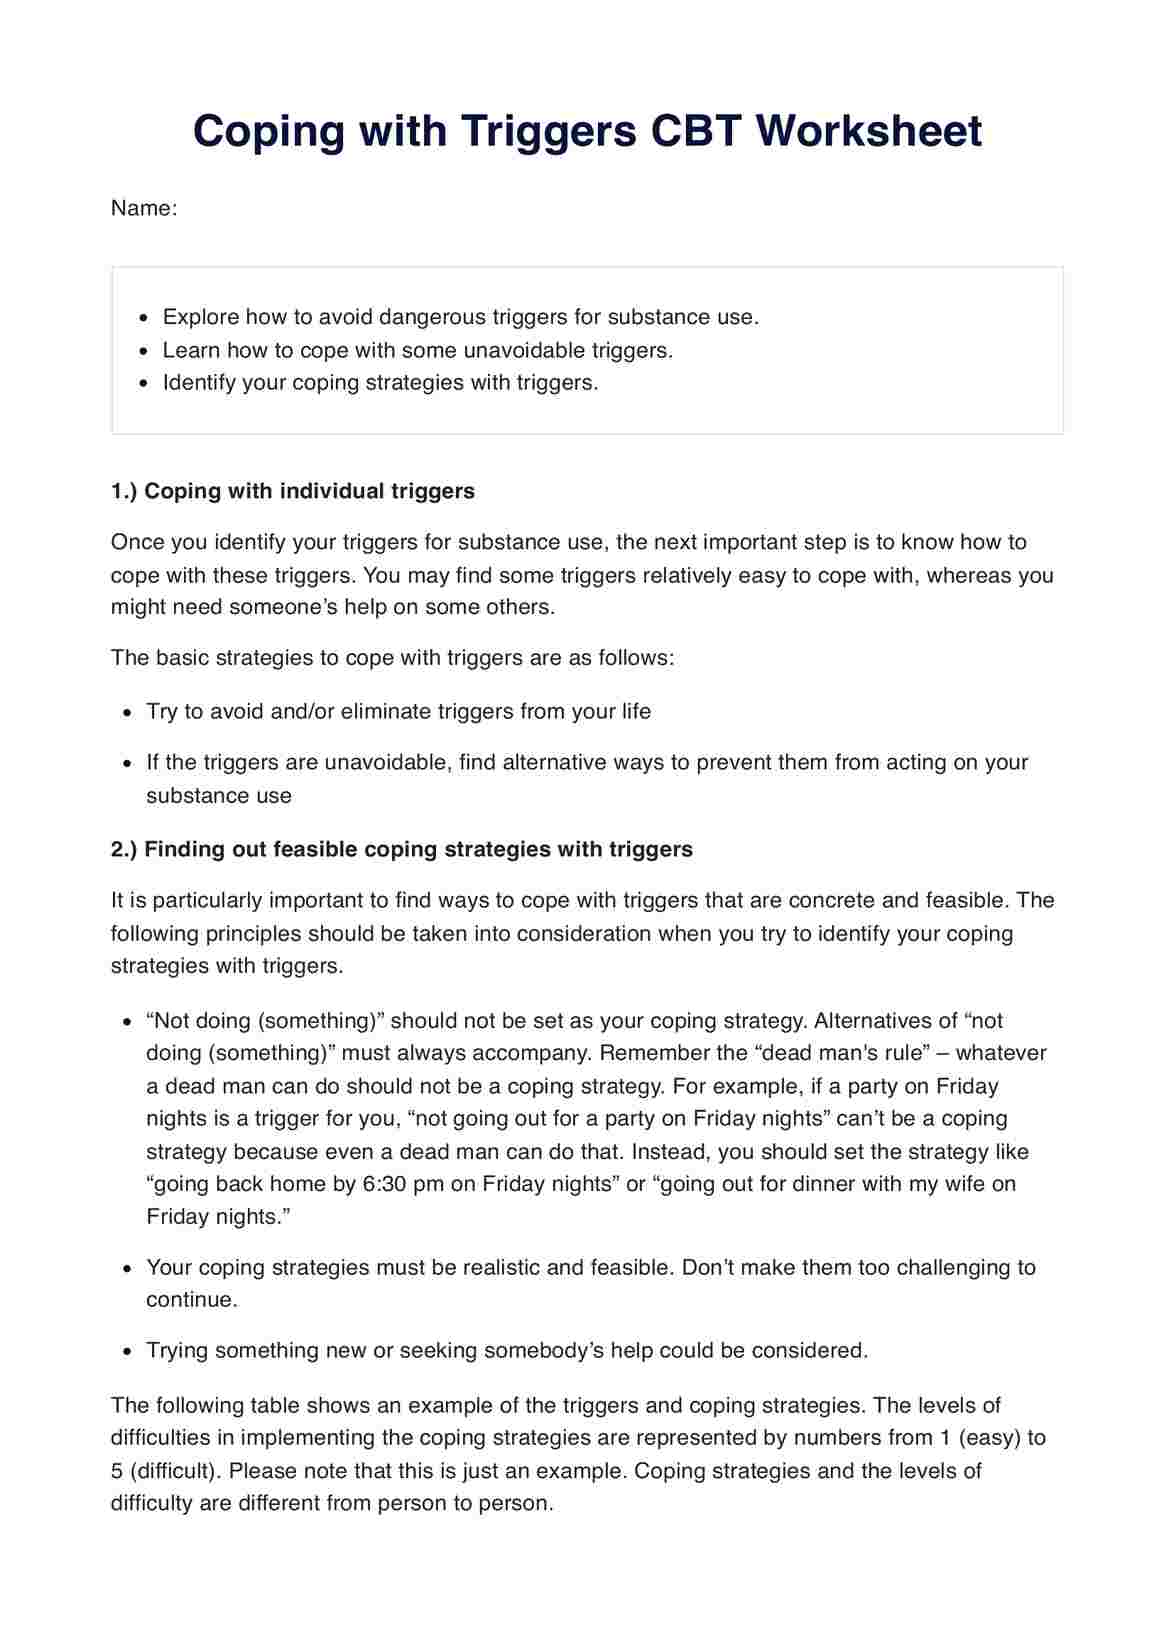 Coping with Triggers CBT Worksheets PDF Example